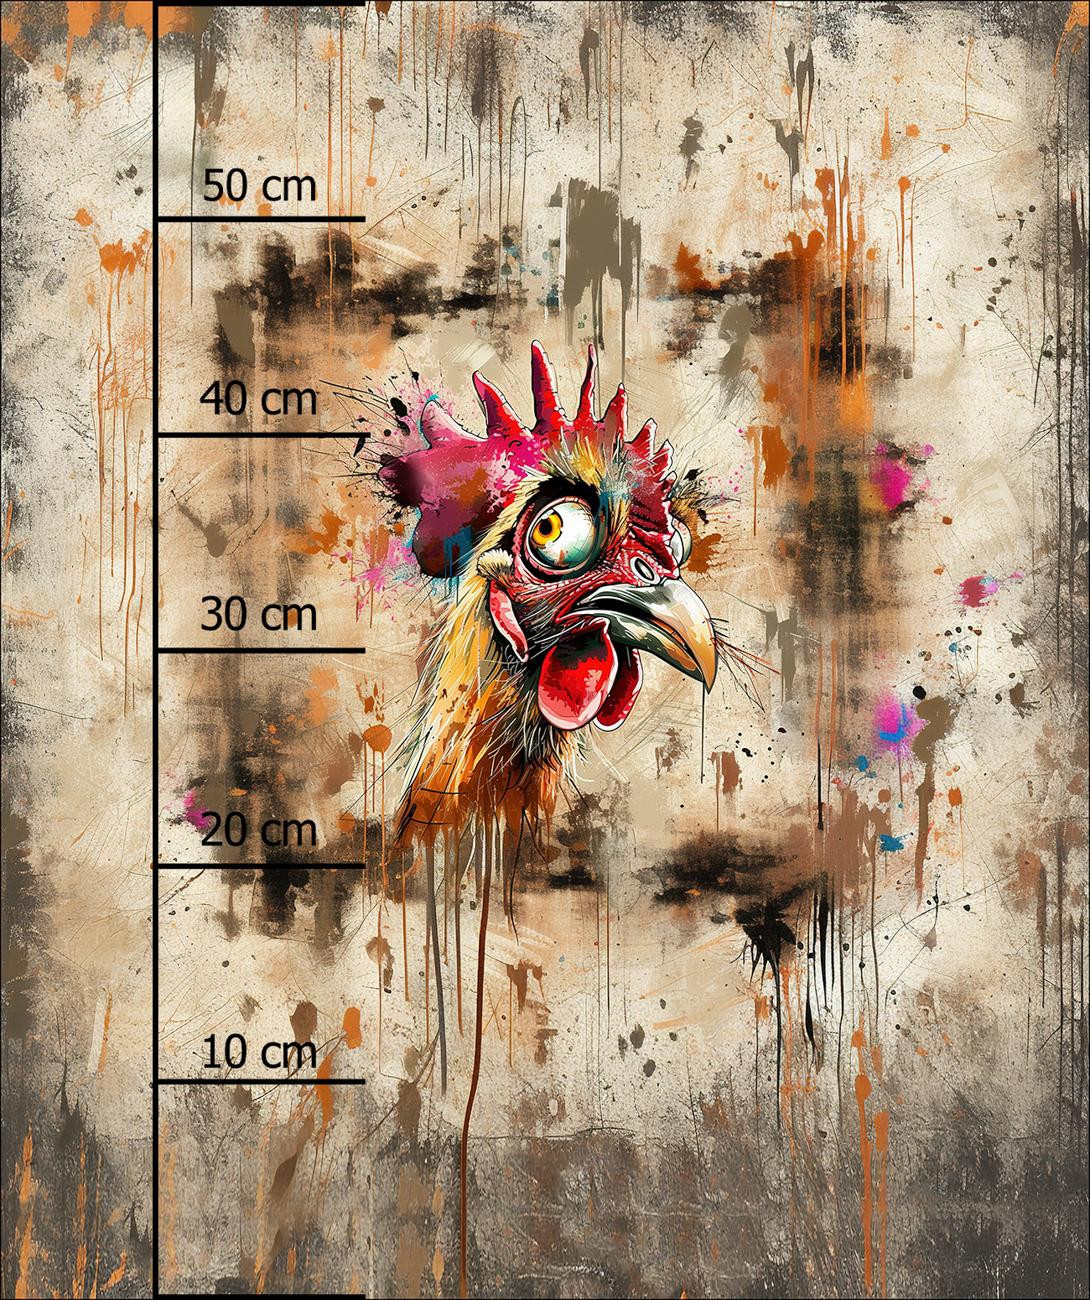 CRAZY CHICKEN - panel (60cm x 50cm) looped knit